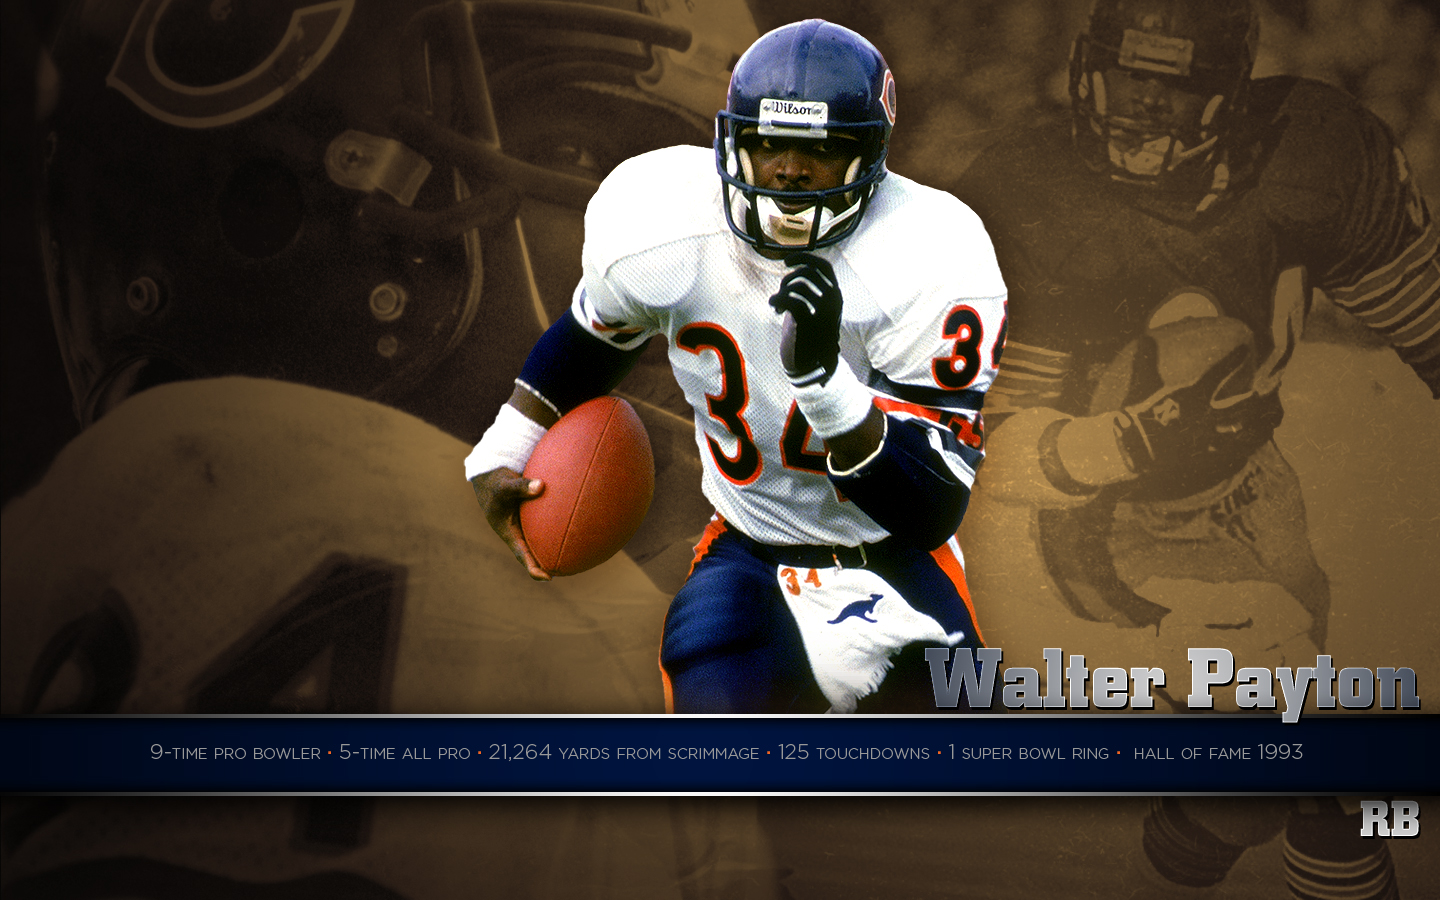 Chicago Bears Tradition Wallpaper